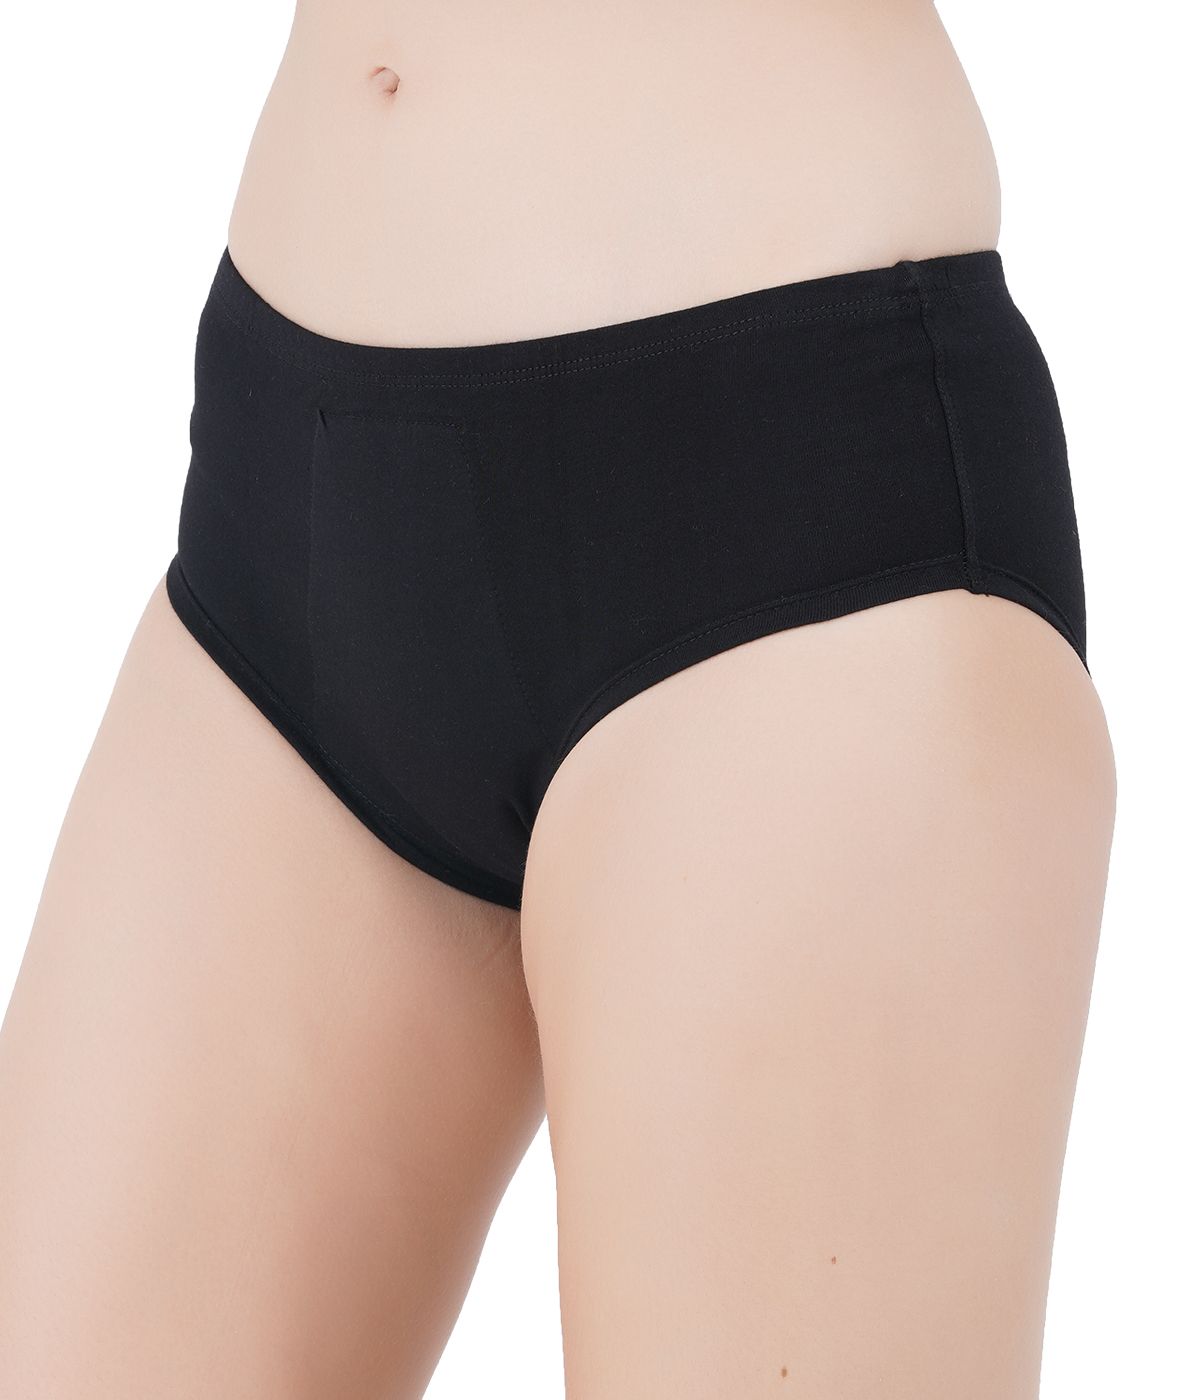 Reusable Leak Proof Highrise Period Panty for women - Go Pad Free